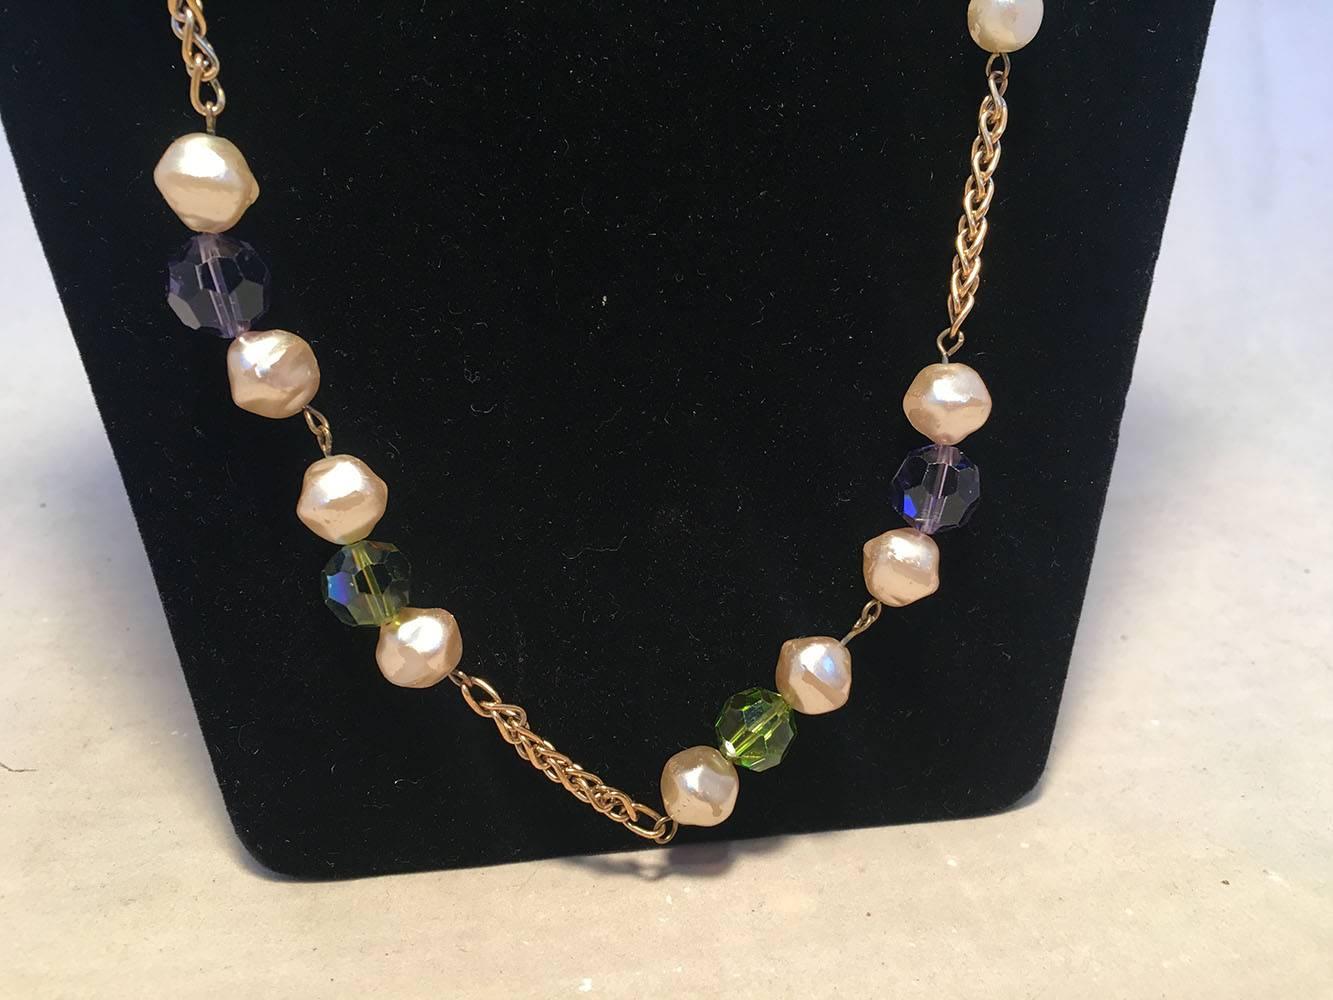 AMAZING Chanel Vintage Pearl and Green and Purple Beaded Necklace with Crystal Ball in good condition.  Gold link chain necklace with large pearl beads, green and purple crystal beads and a centered large rhinestone crystal ball detail featuring the